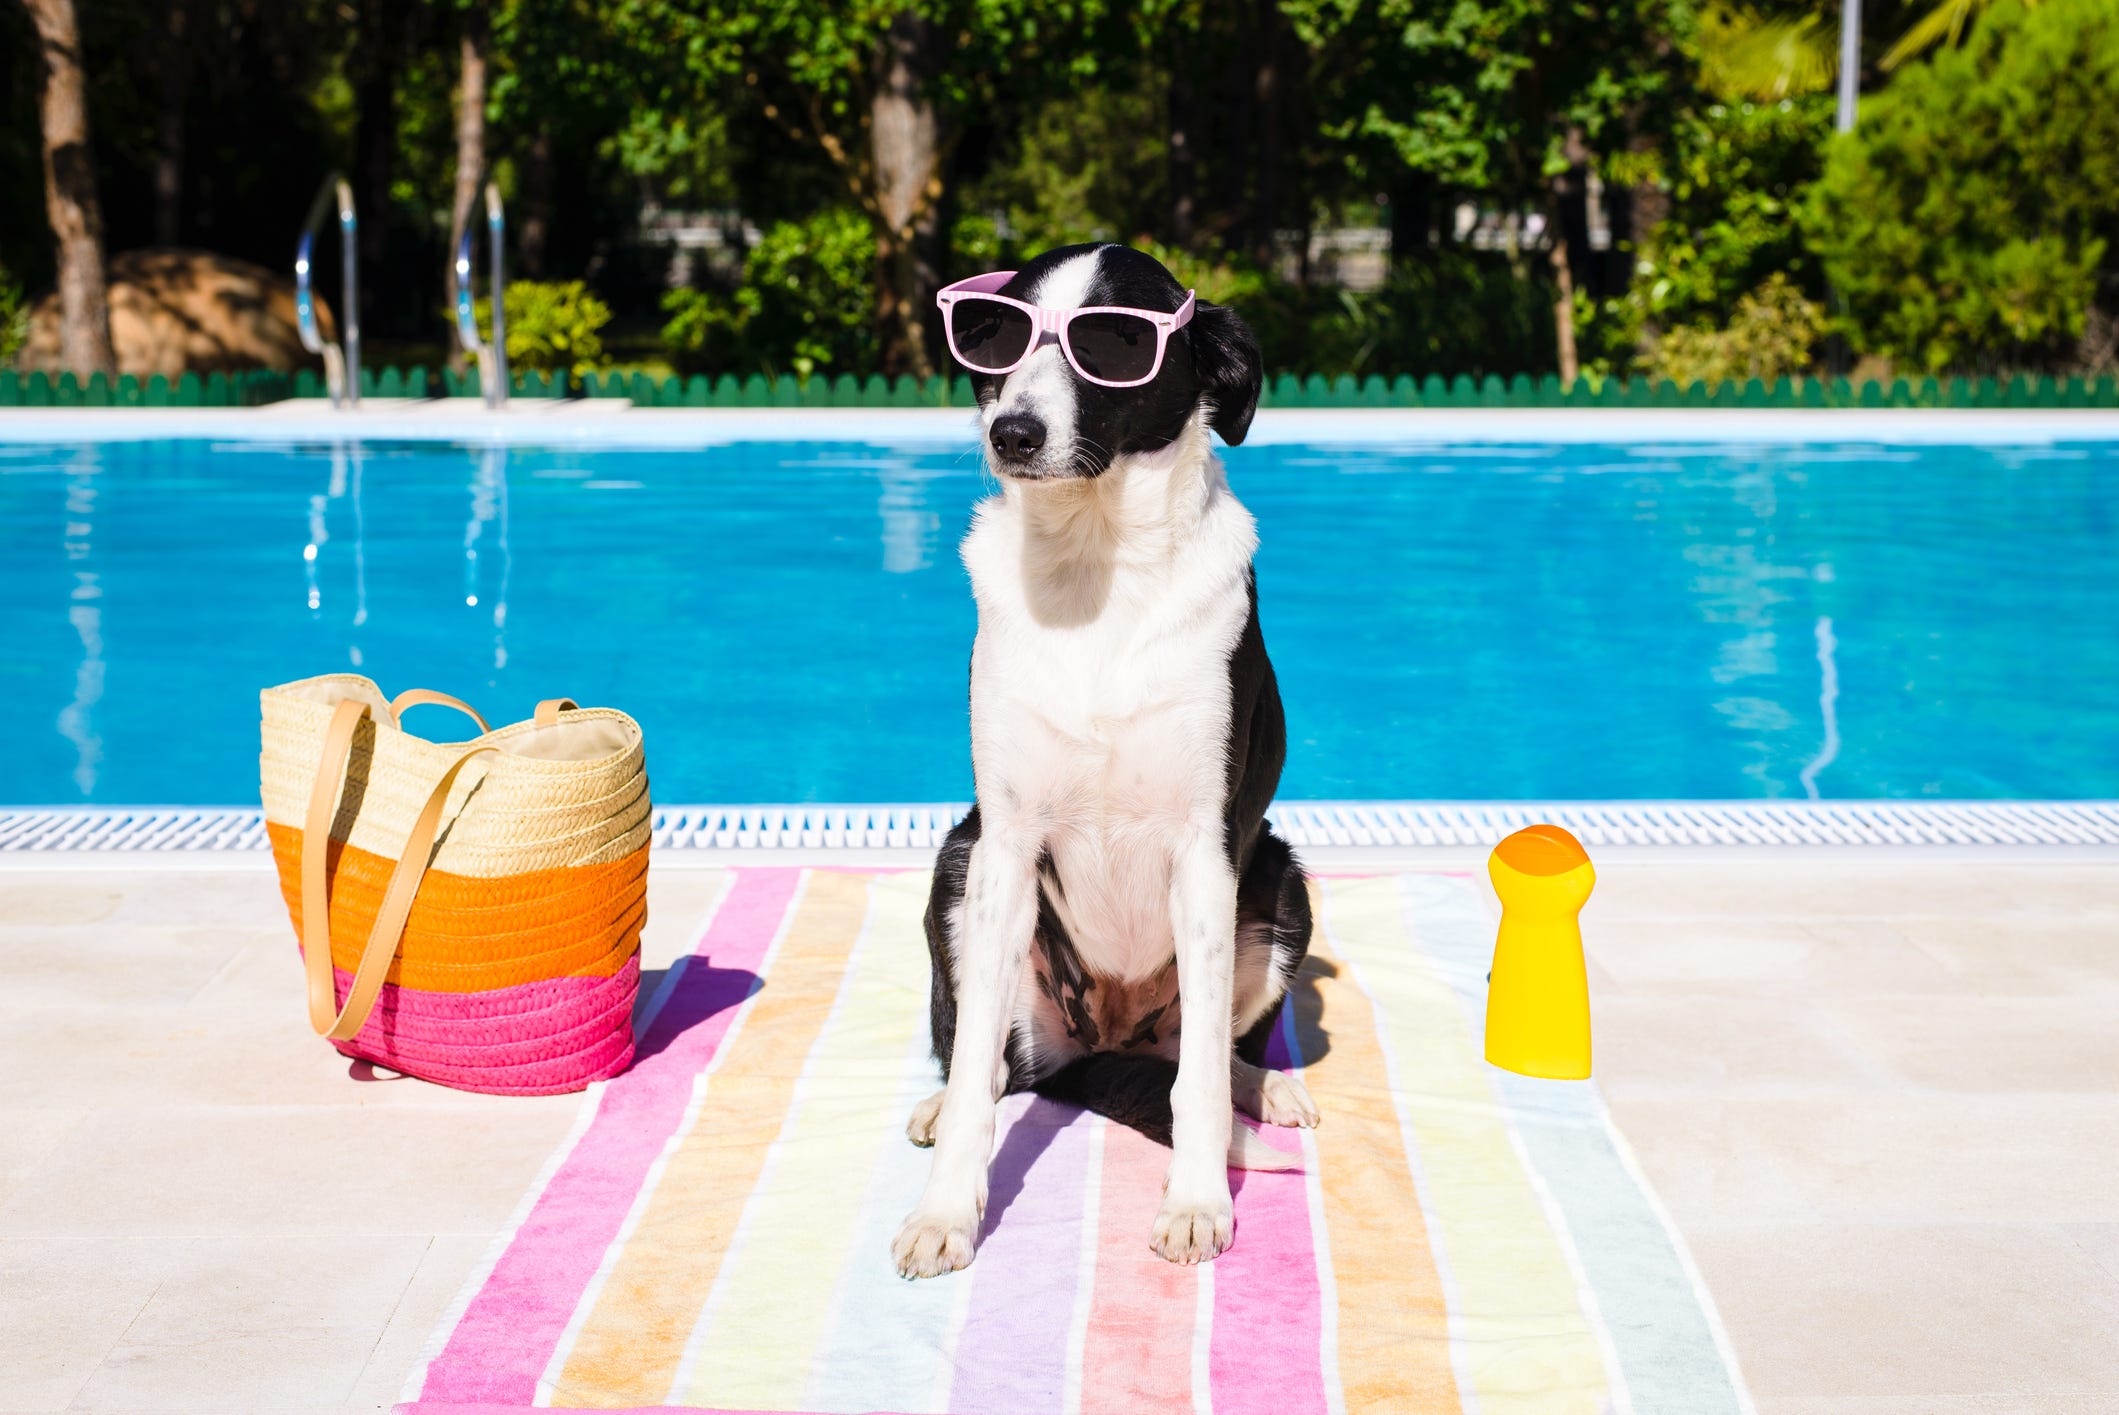 how do you keep dogs cool in hot weather